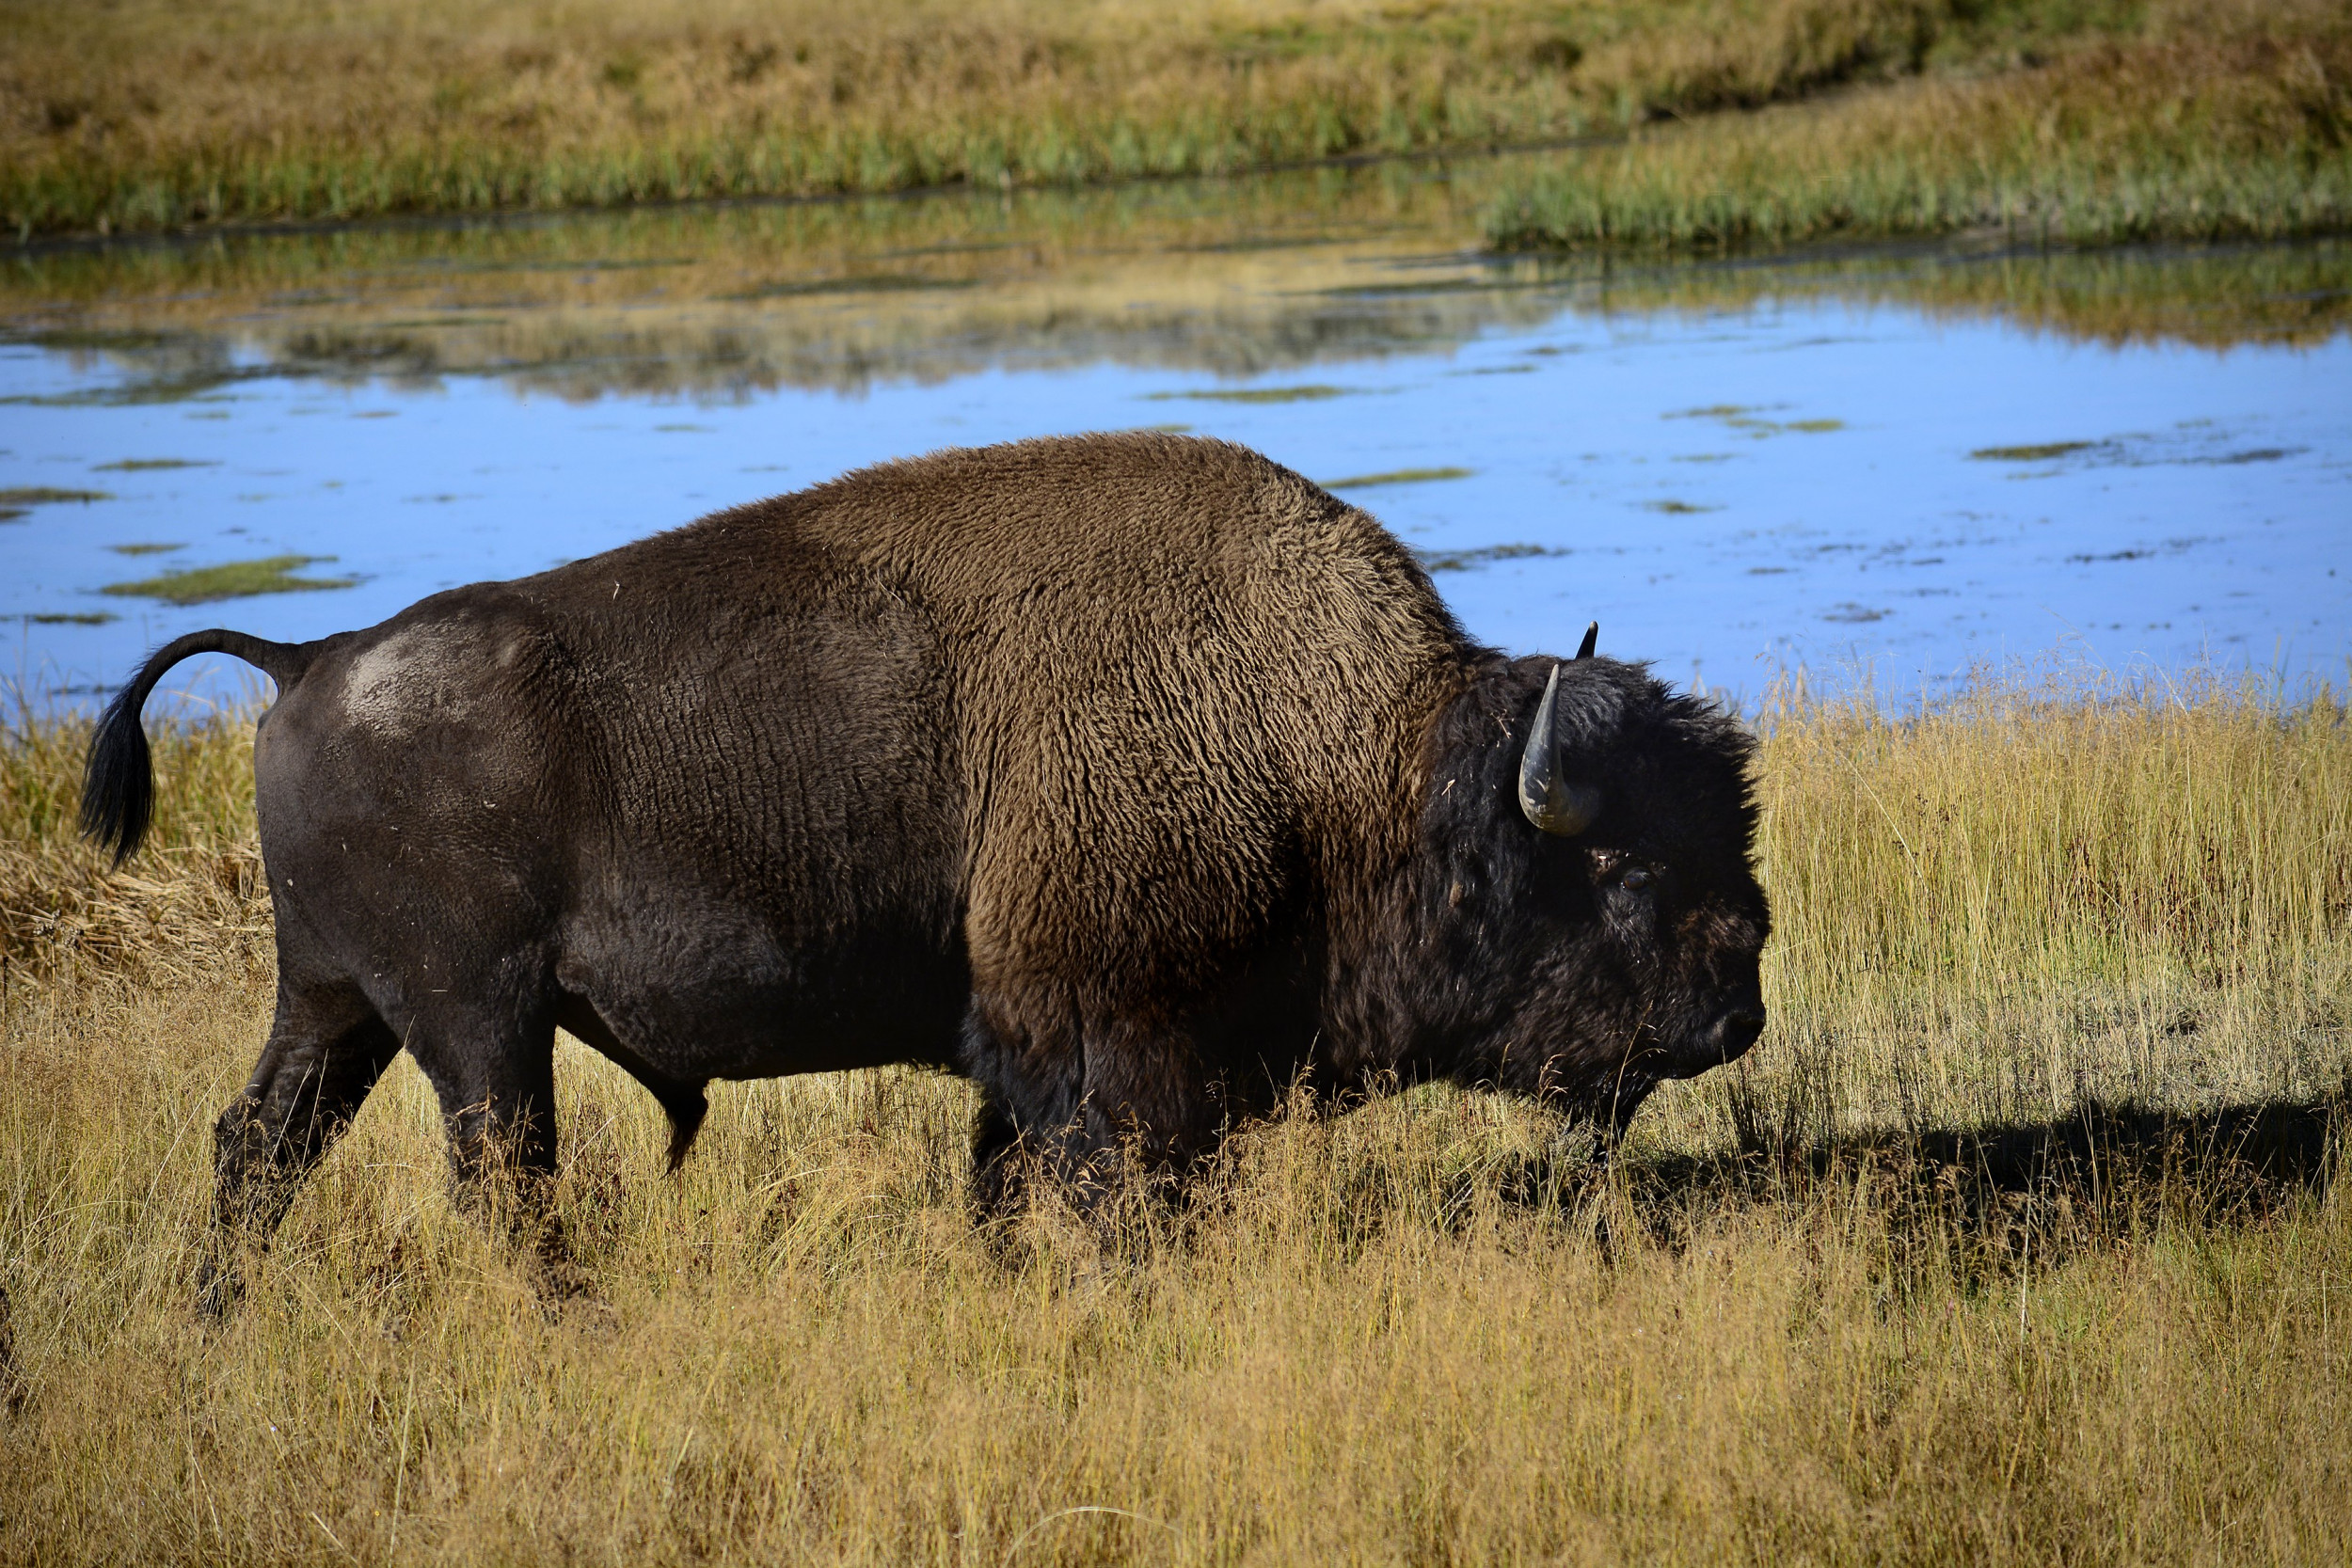 72-Year-Old Woman Gored by Bison While Trying to Snap a Picture